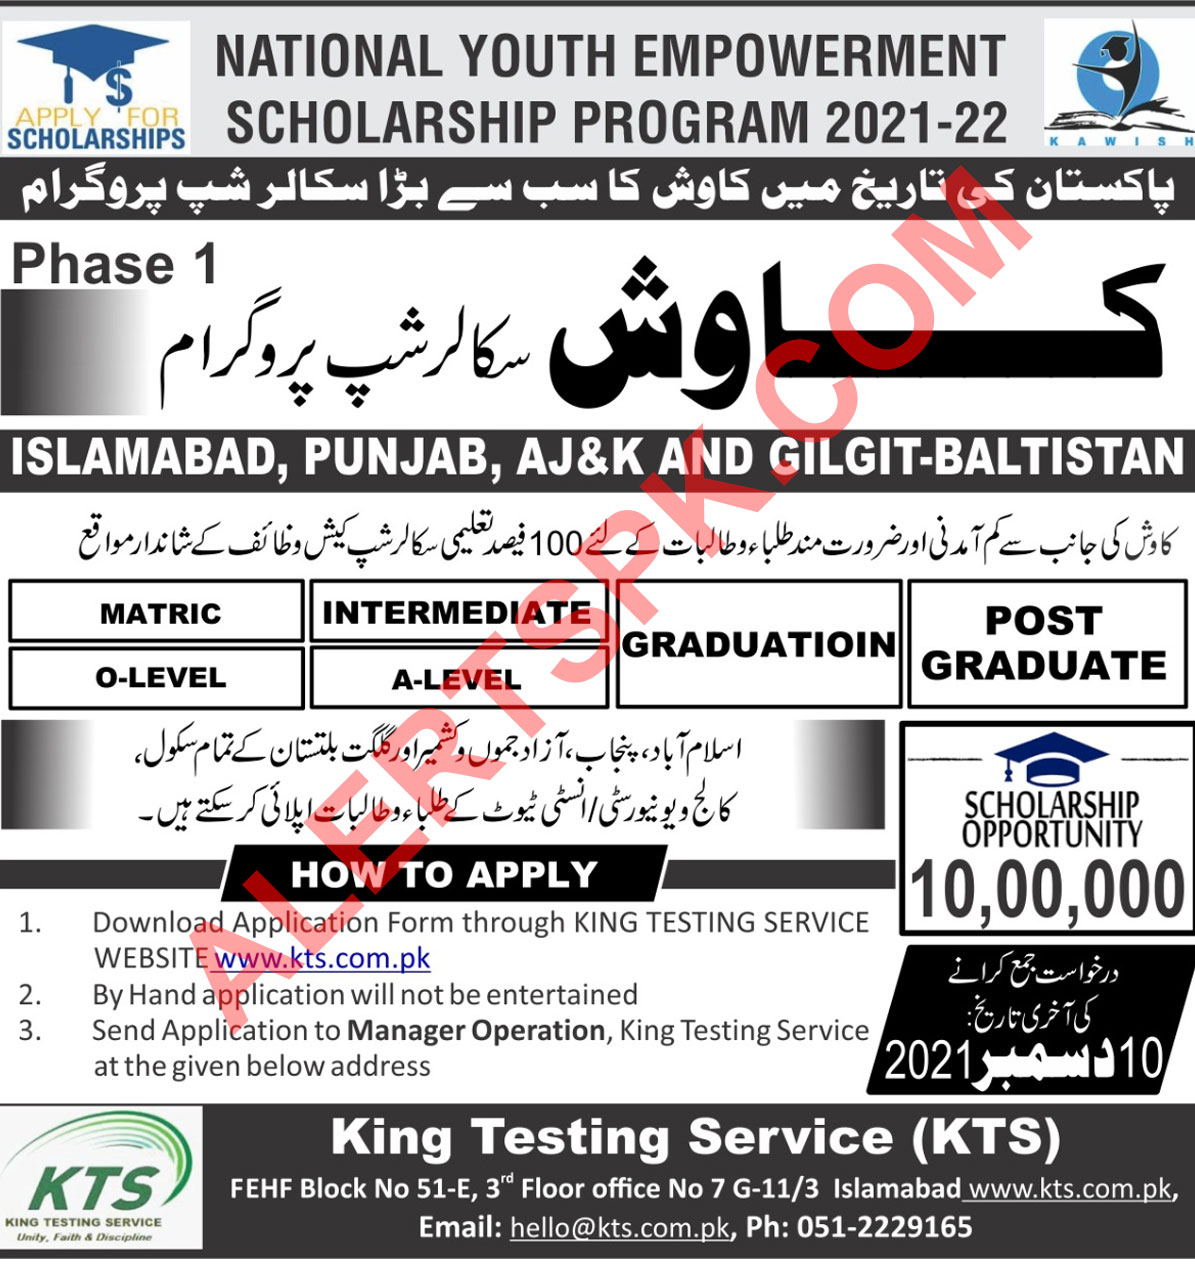 KTS-KAWISH Scholarship Program can be downloaded from this page.